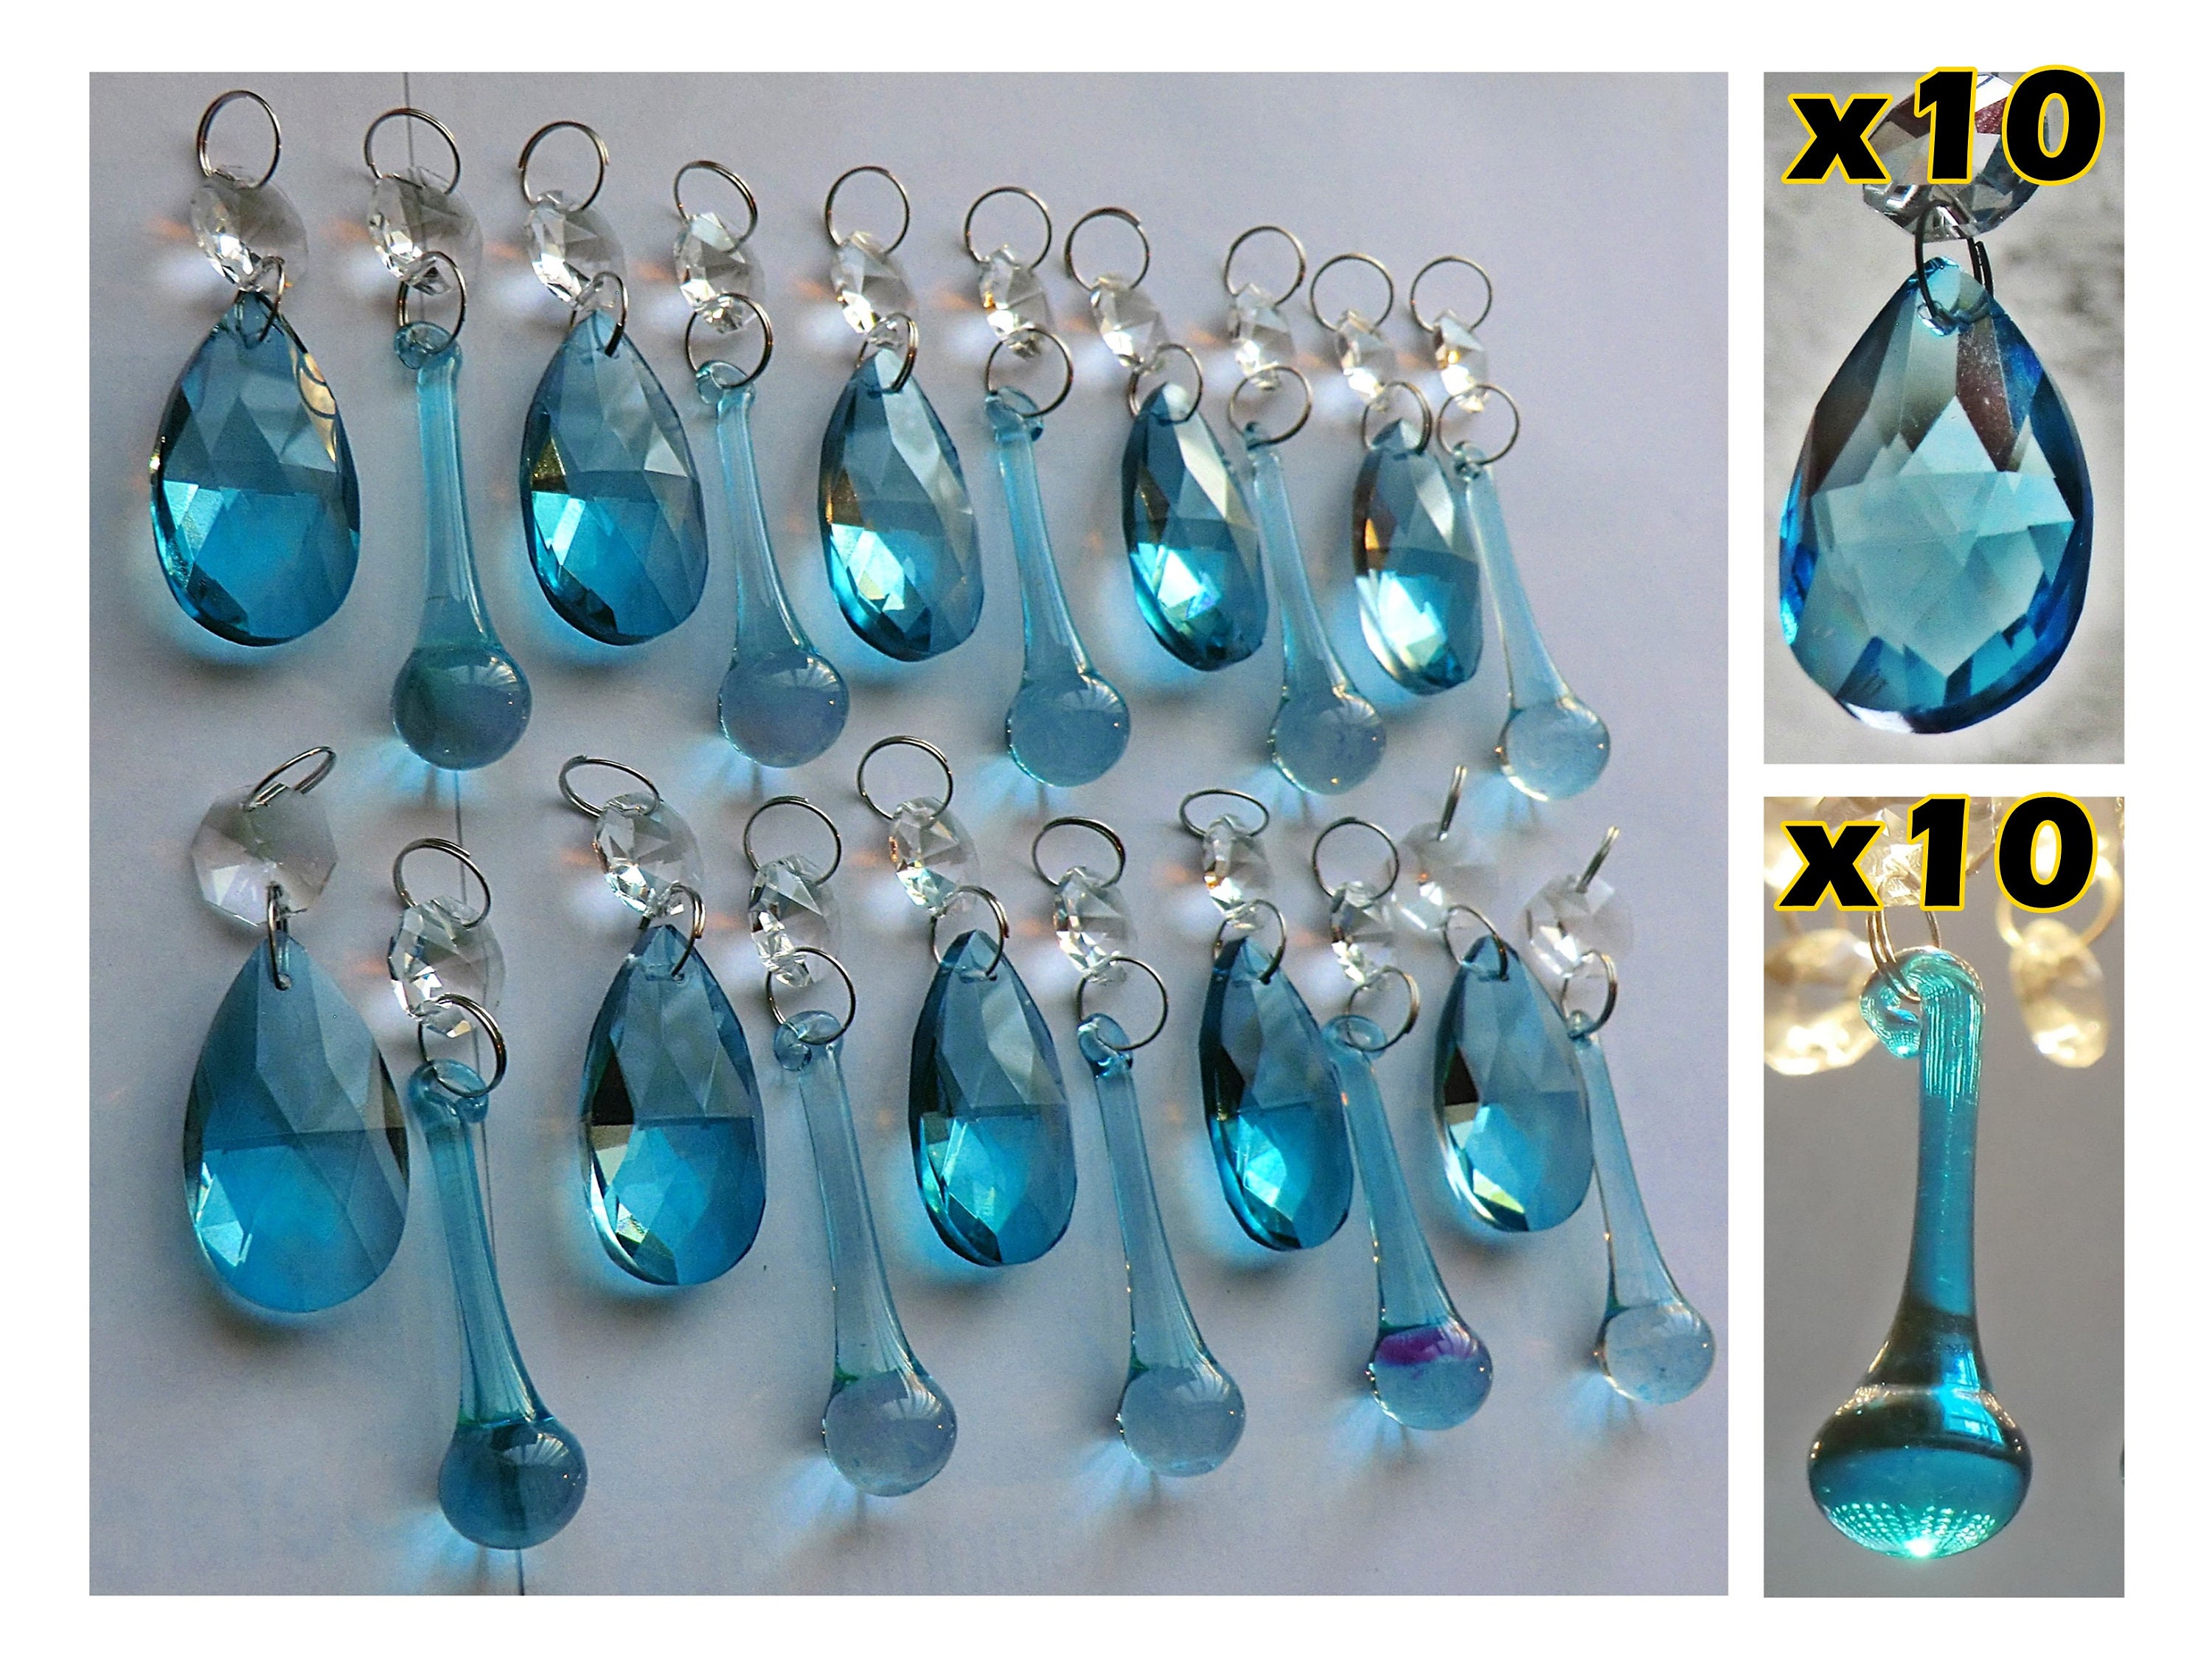 Vintage Aqua Chandelier Crystals Small Aqua Blue Spear Chandelier Prism Two Italian Turquoise Crystals AB Bead Jewelry Suncatcher Wind Chime